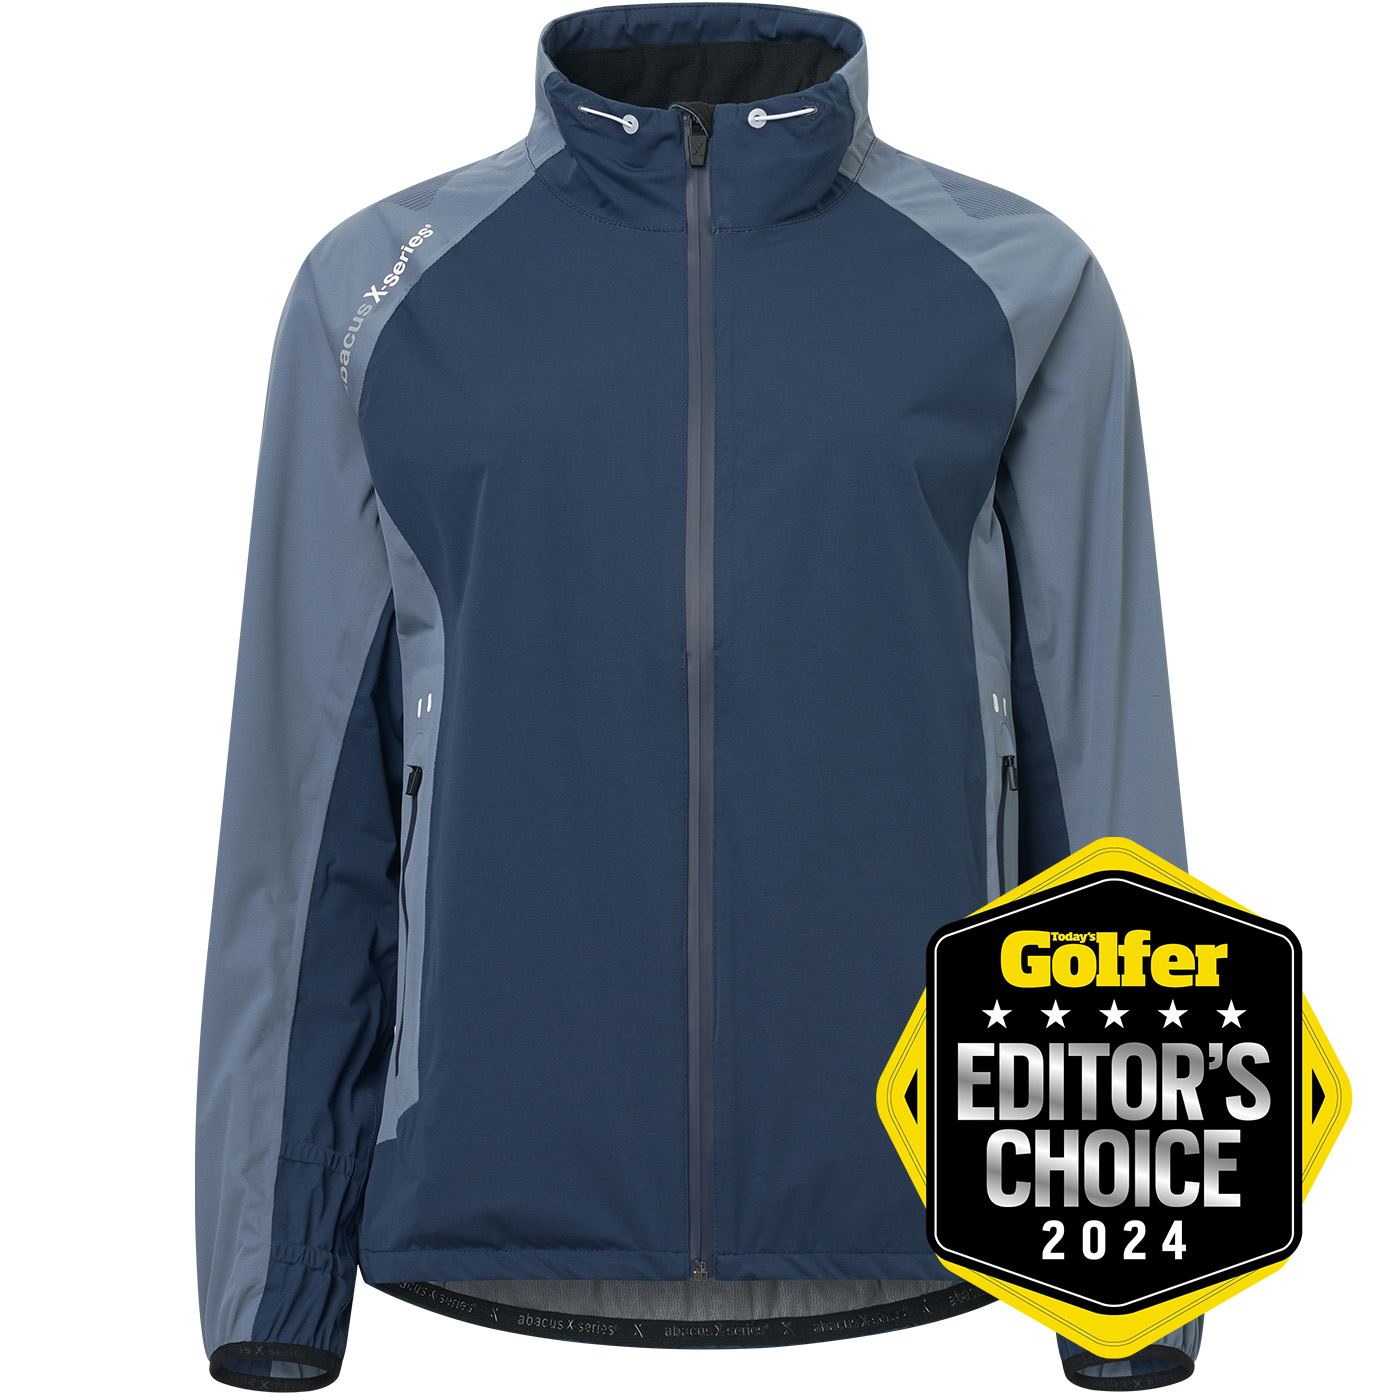 Lds Pitch 37.5 technology rainjacket - dusty blue in the group WOMEN / All clothing at Abacus Sportswear (2040982)